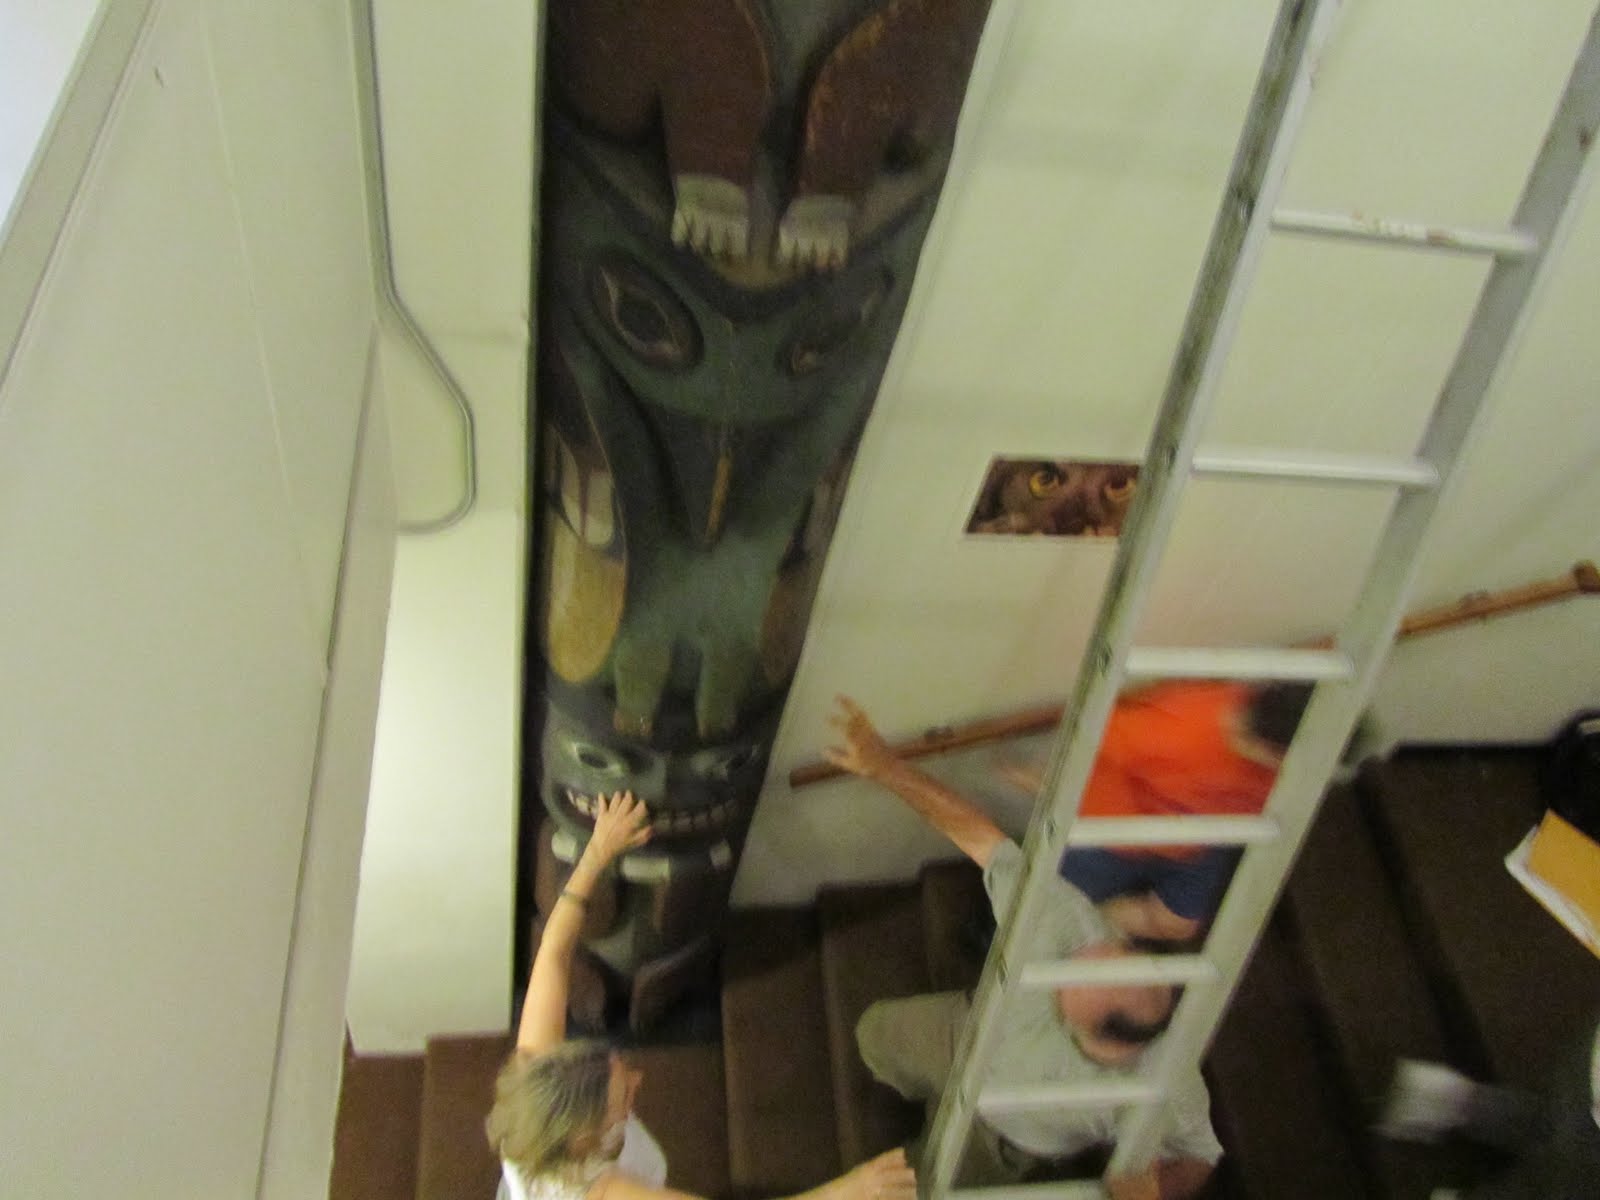 shot from above, museum staff finalizing the placement of the large totem pole in the stairwell